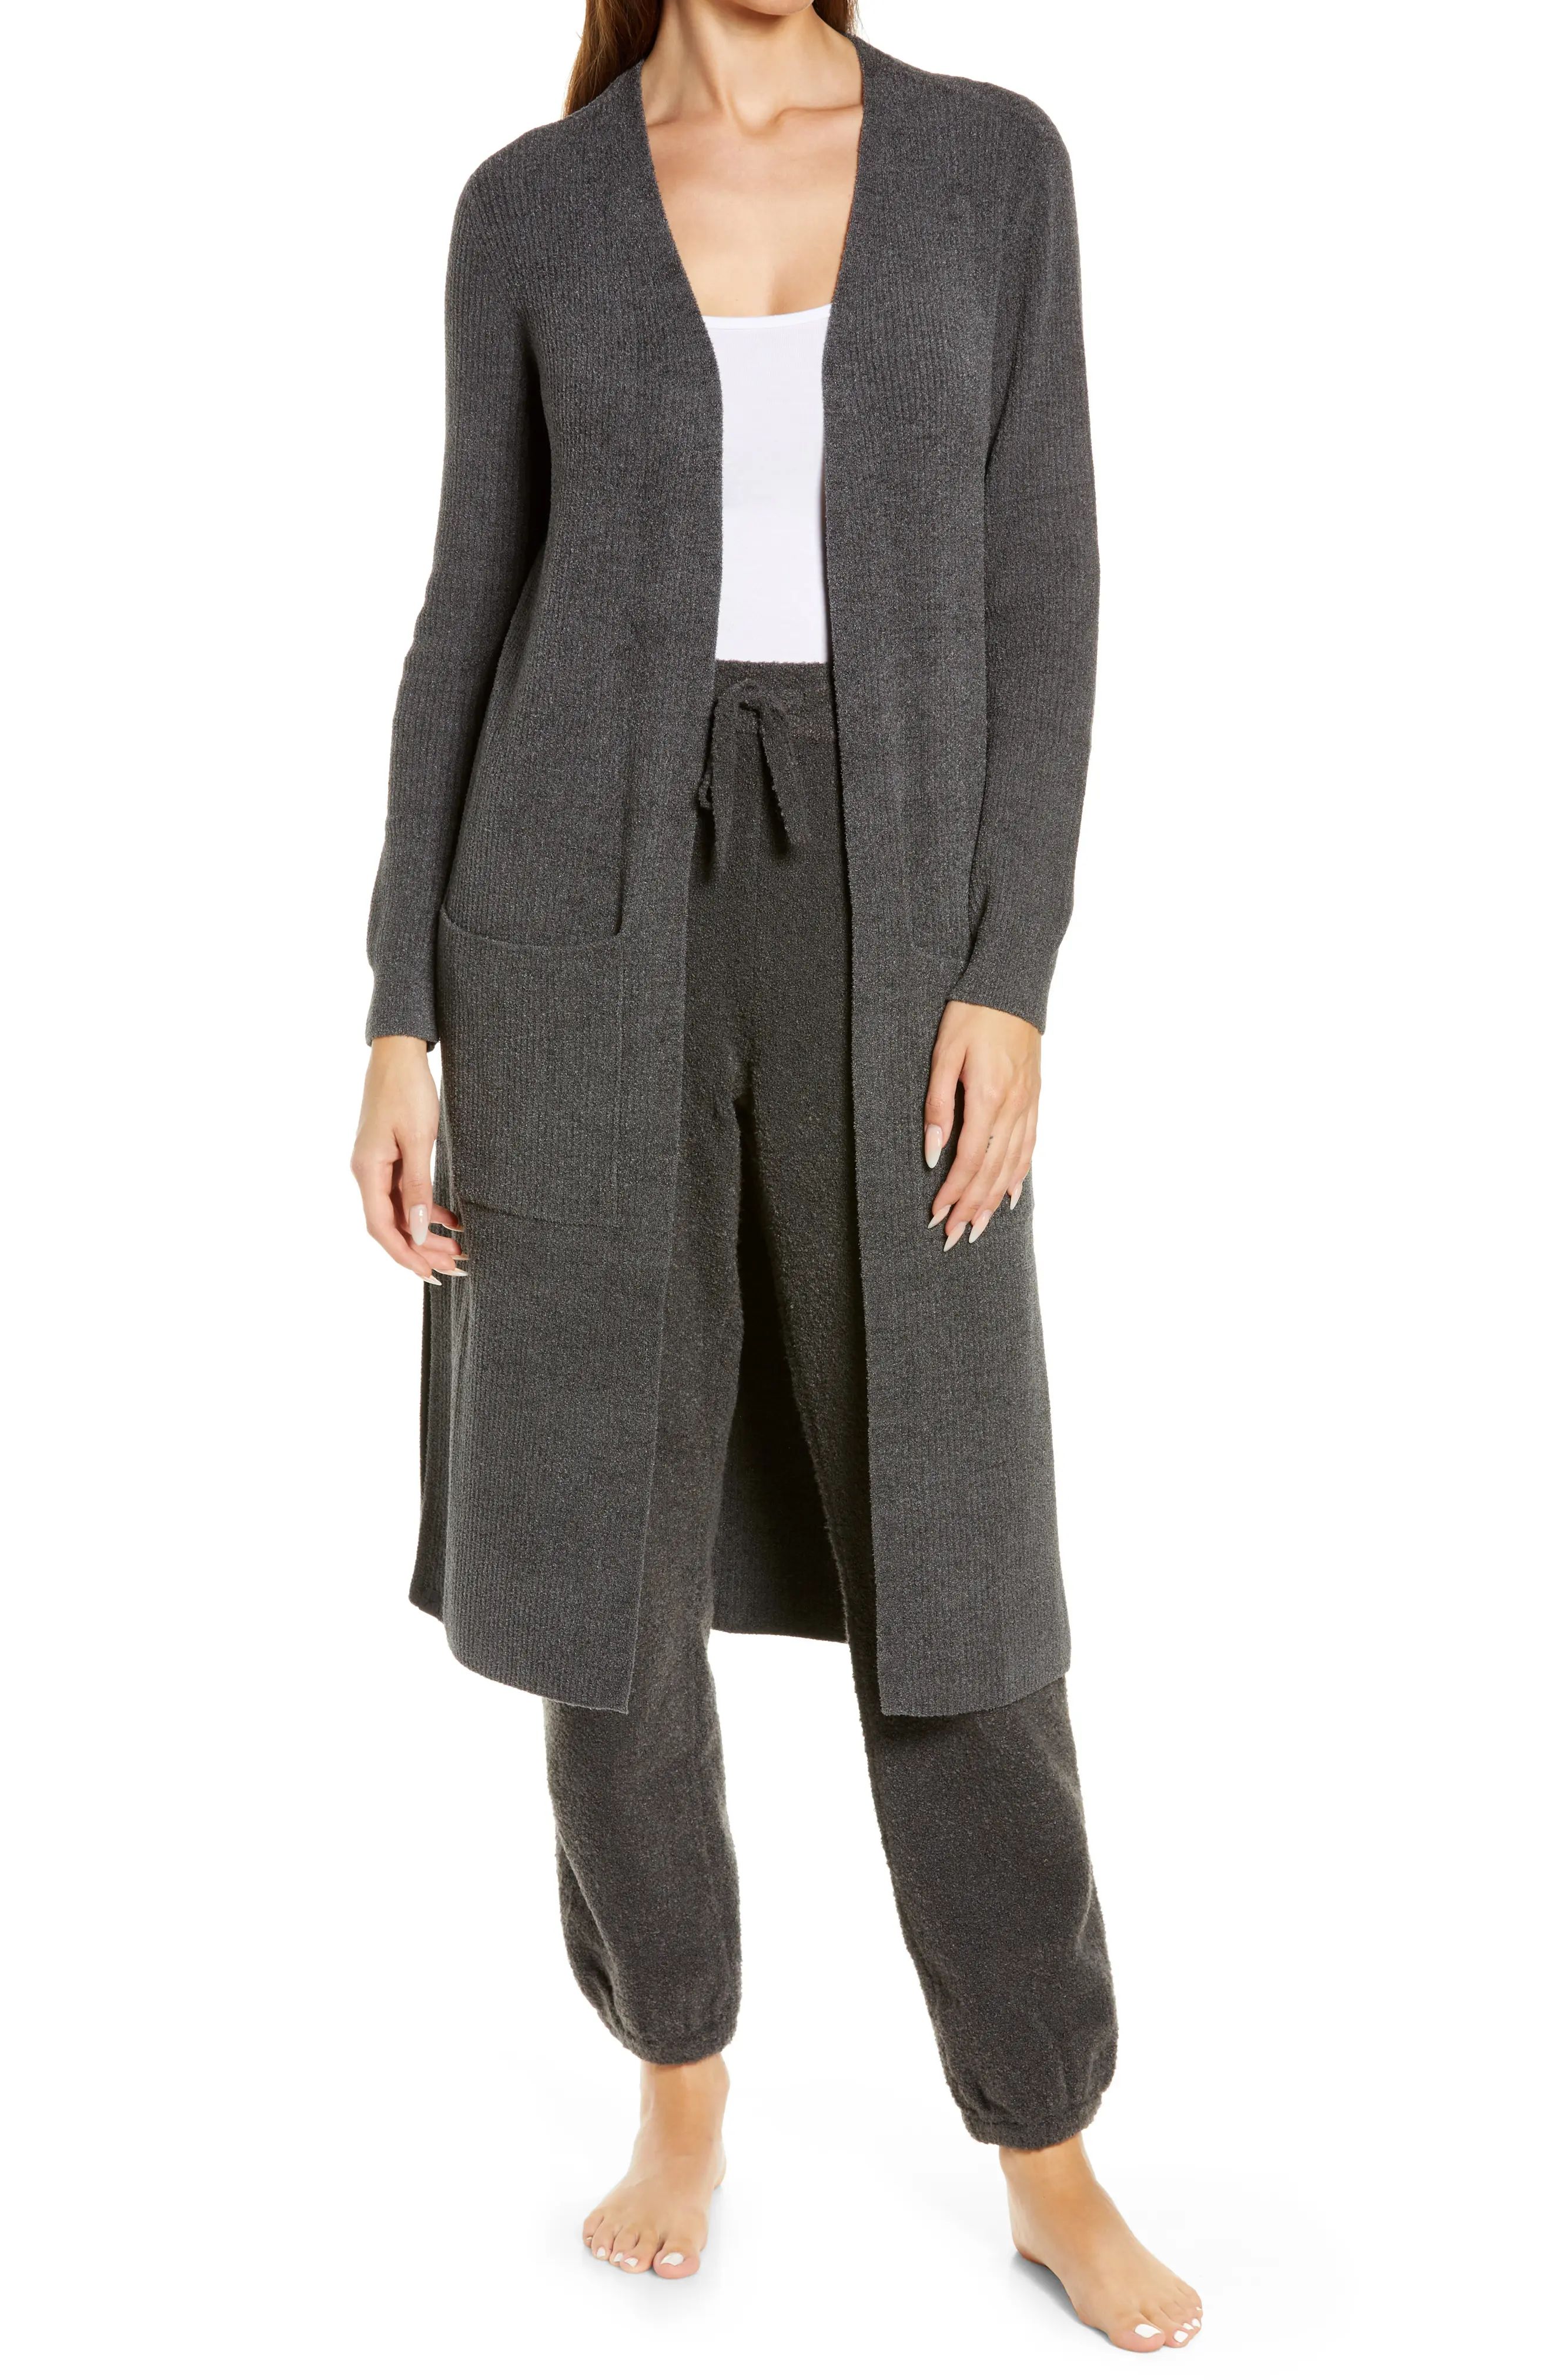 Barefoot Dreams(R) CozyChic Lite(TM) Long Cardigan, Size Small in Carbon at Nordstrom | Nordstrom